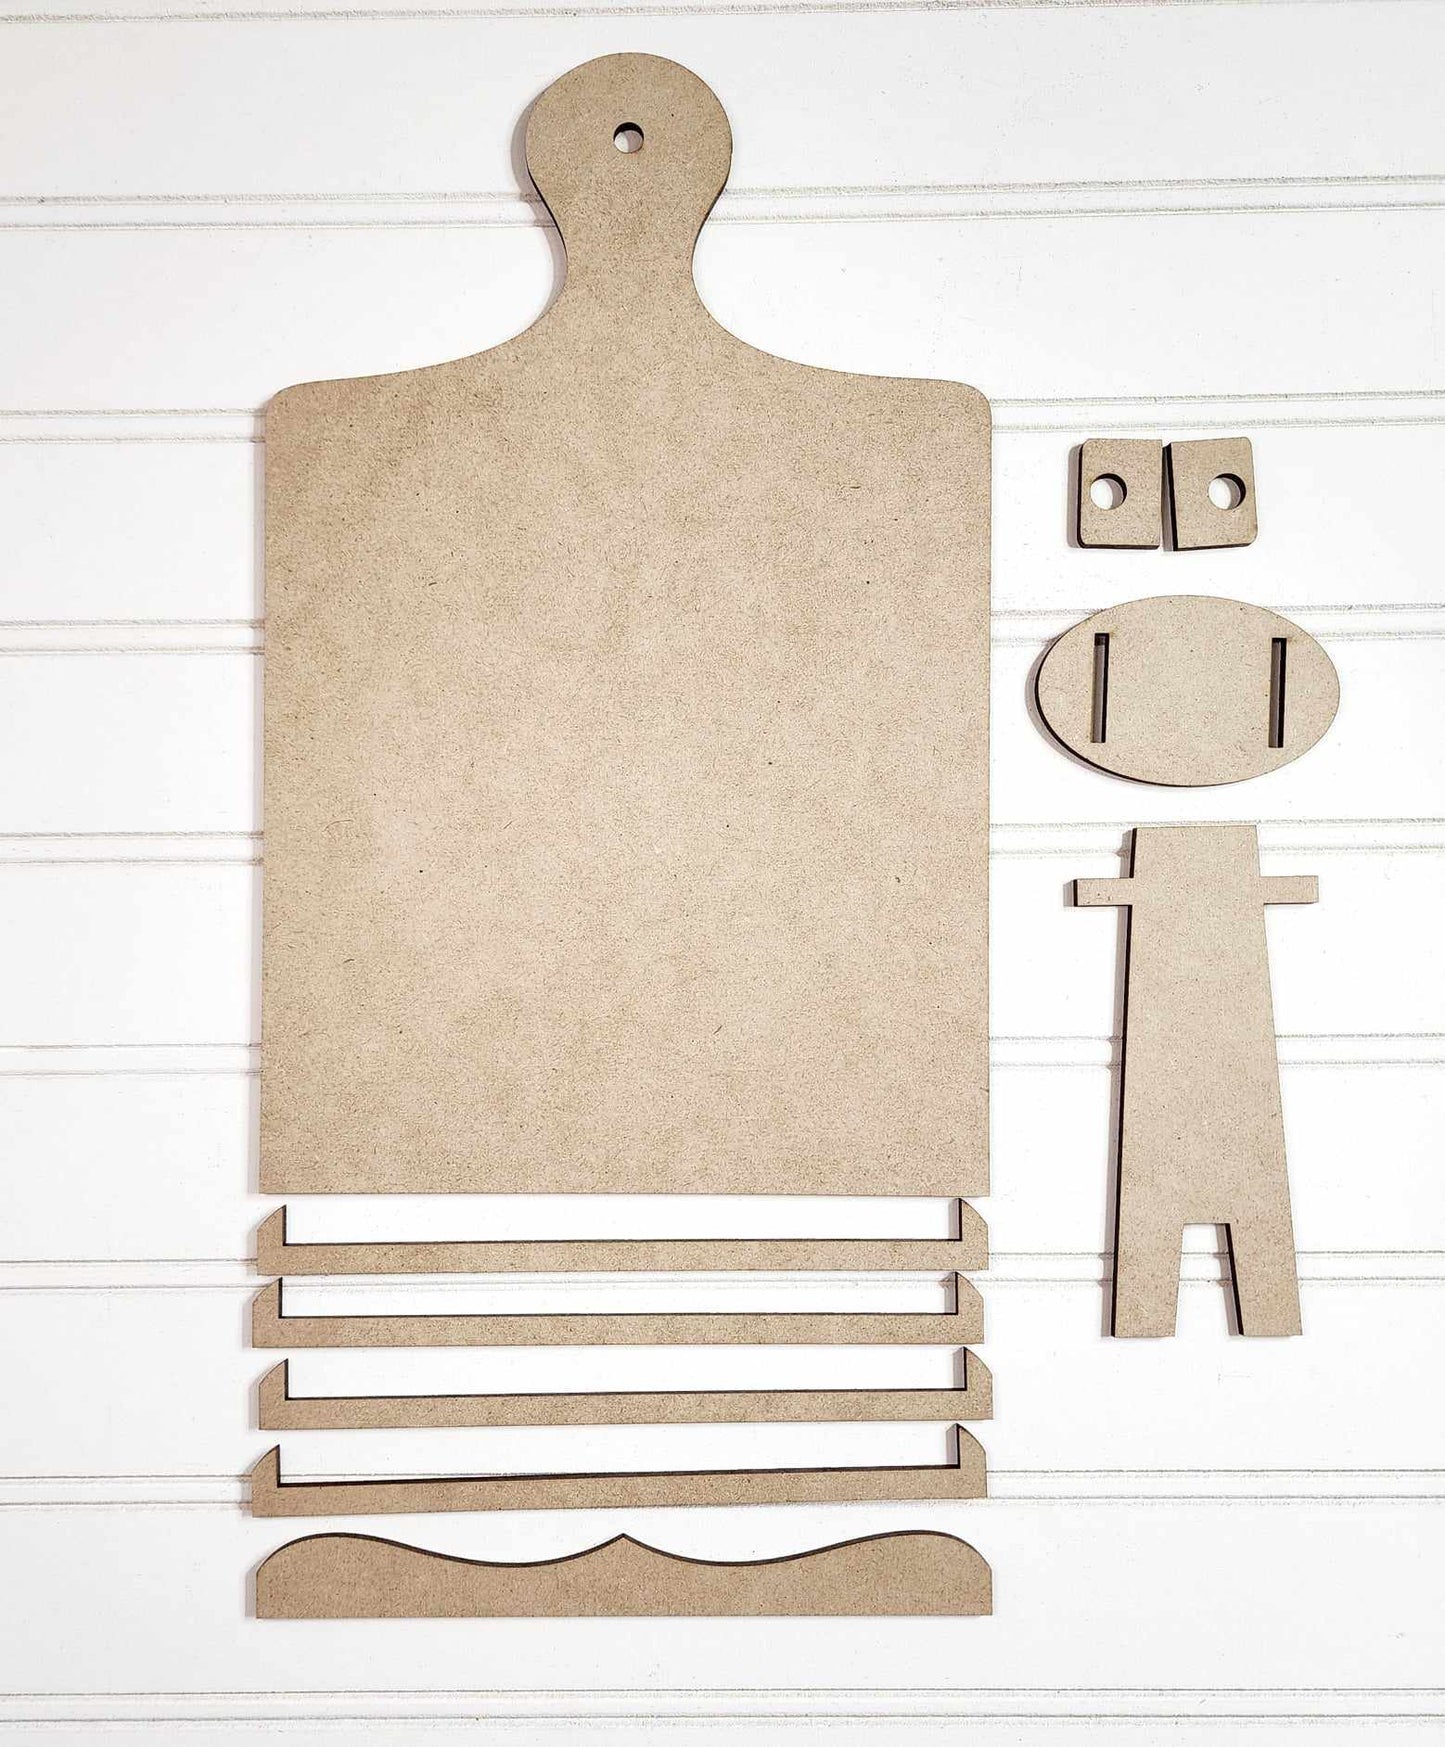 1 Bread Board Sign Holder only Primitive Home Collection  cutouts - unpainted wooden cutouts, ready for you to paint